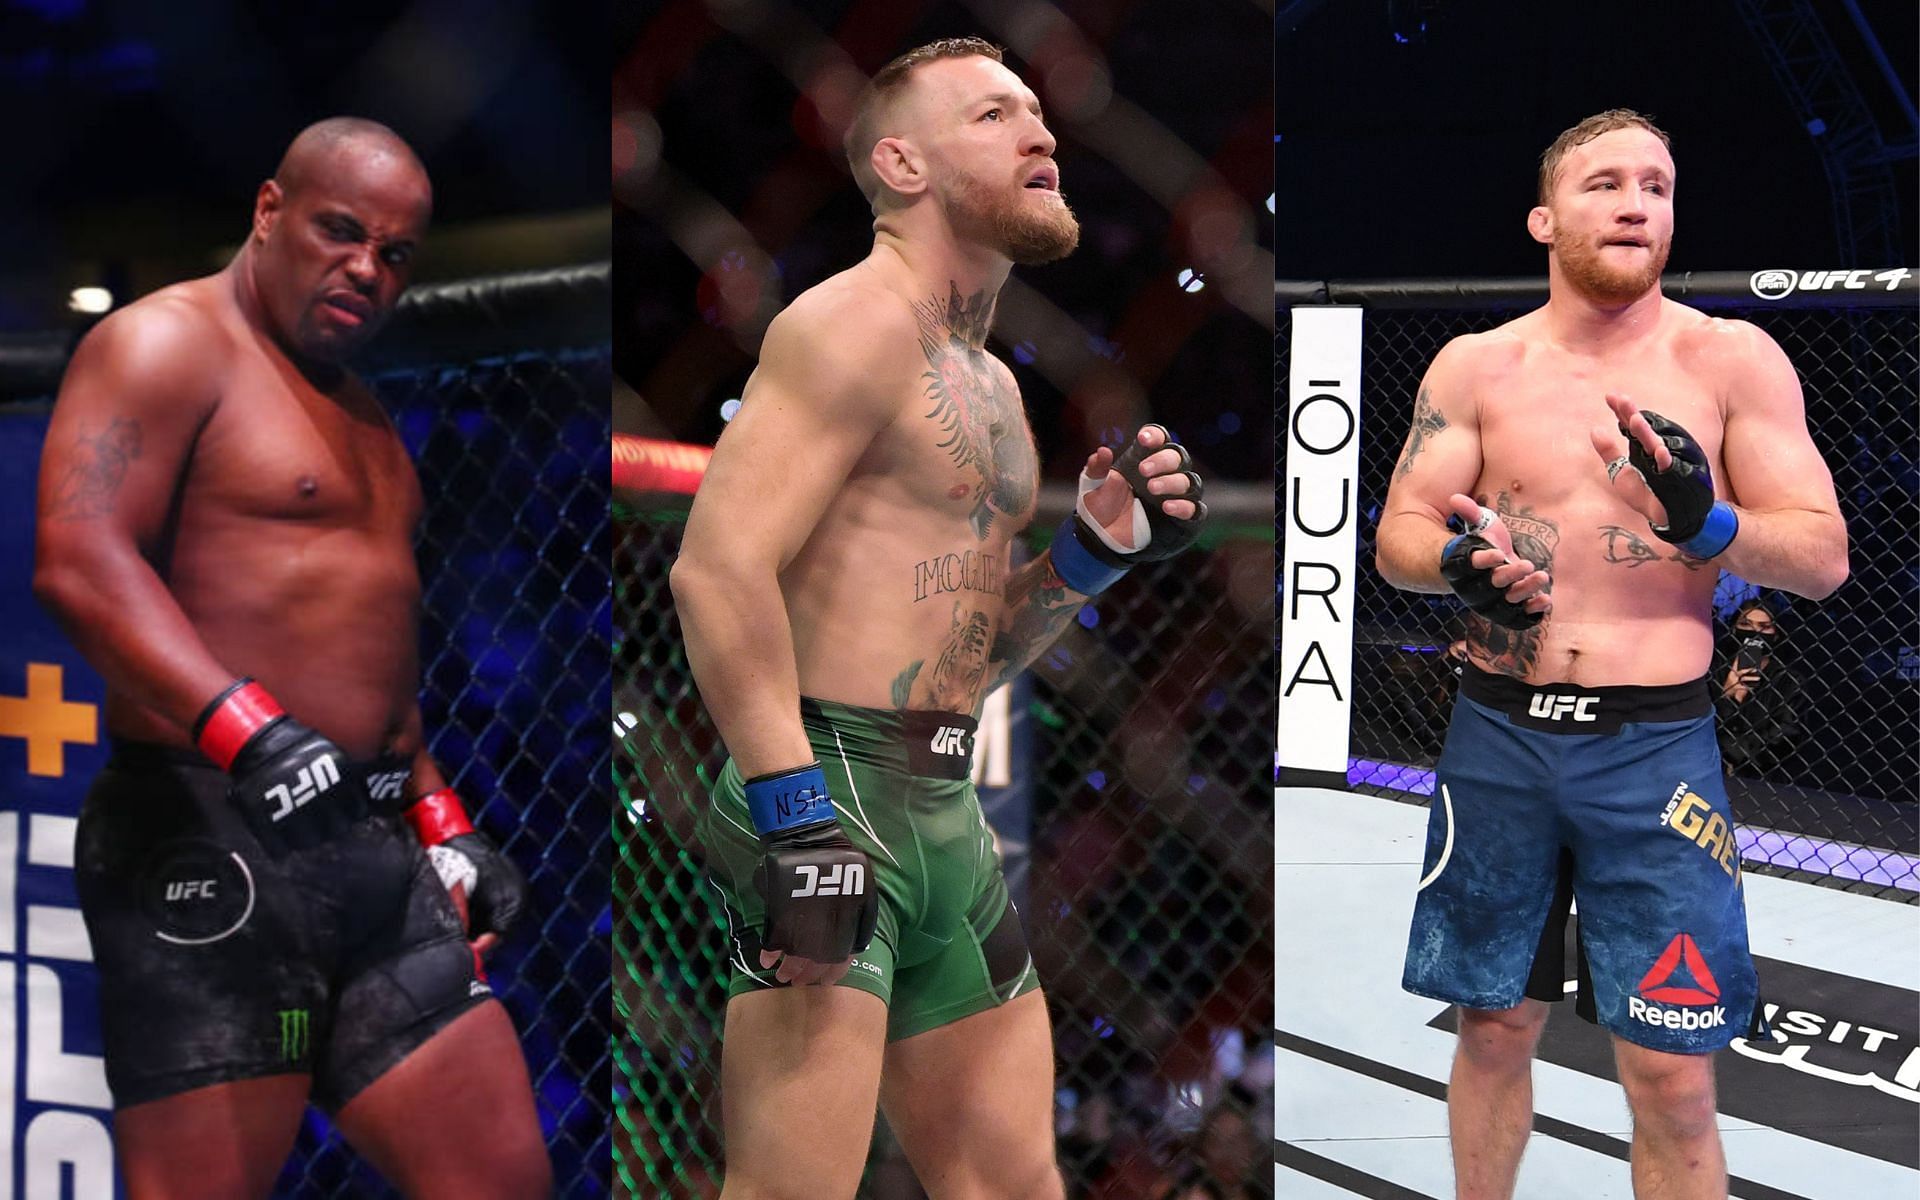 From left to right: Daniel Cormier, Conor McGregor, Justin Gaethje